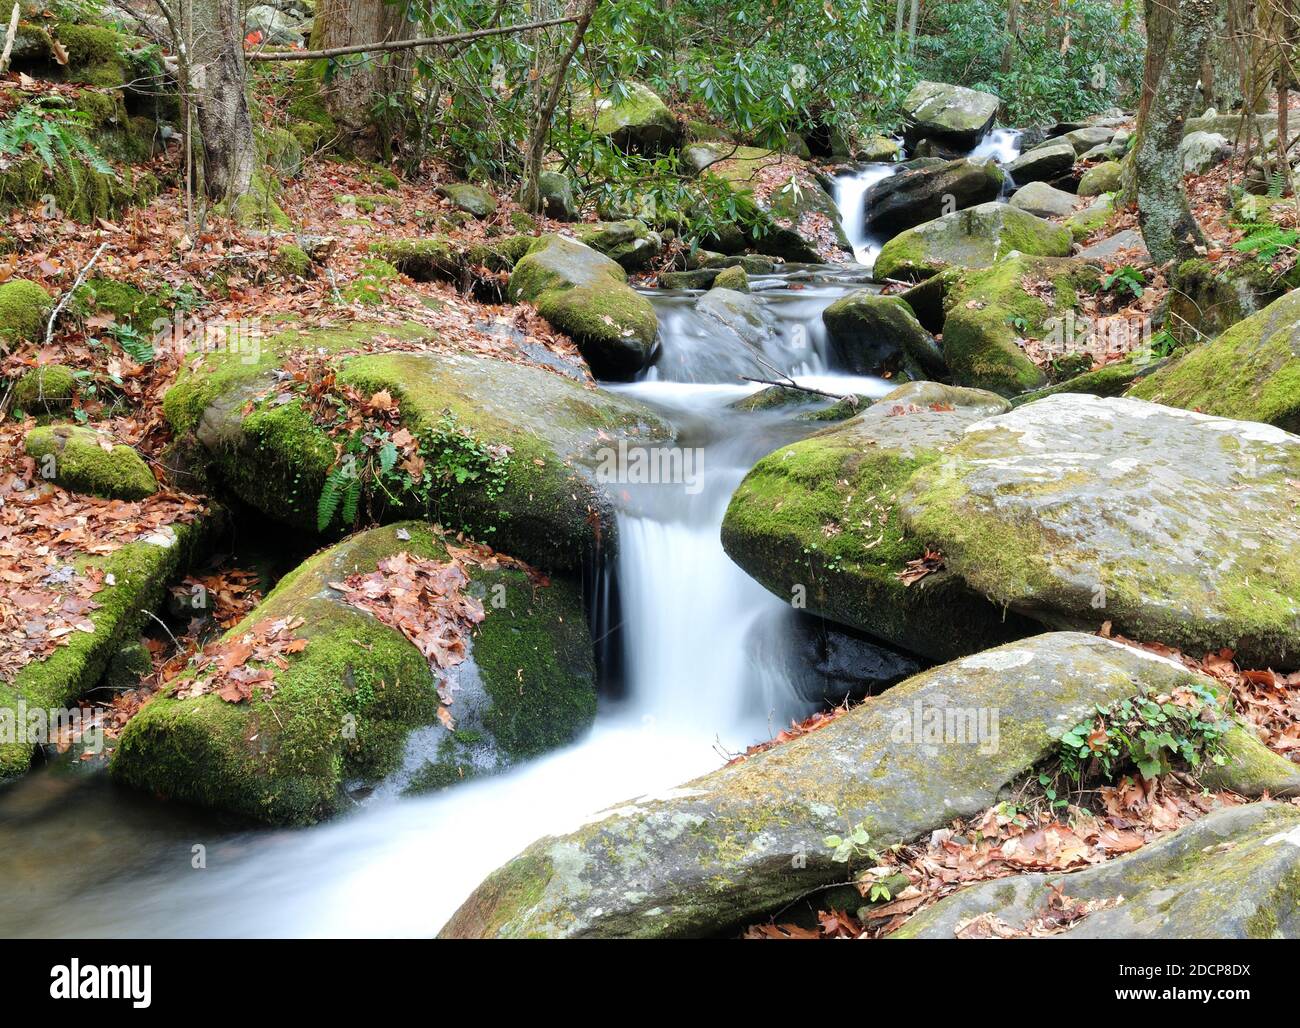 Long Time Exposure Of Flowing Water Of A Creek At Cherokee Orchard Road In Great Smoky Mountains National Park Tennessee On A Cloudy Autumn Day Stock Photo